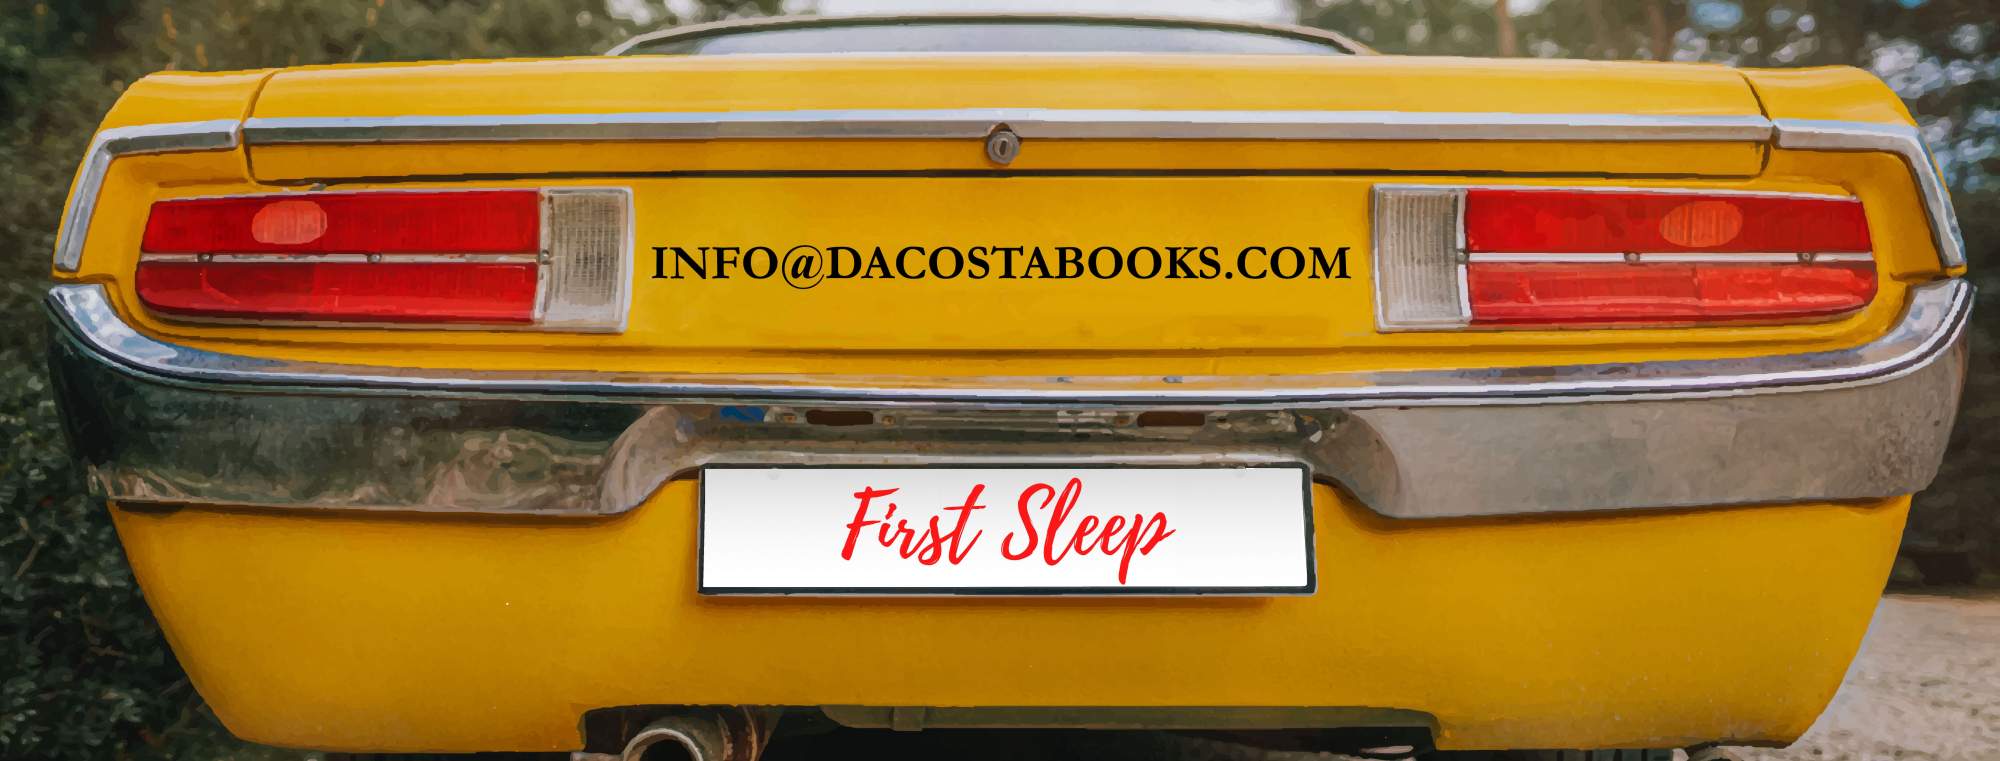 Customer Service Information from Da Costa Books and how to contact us